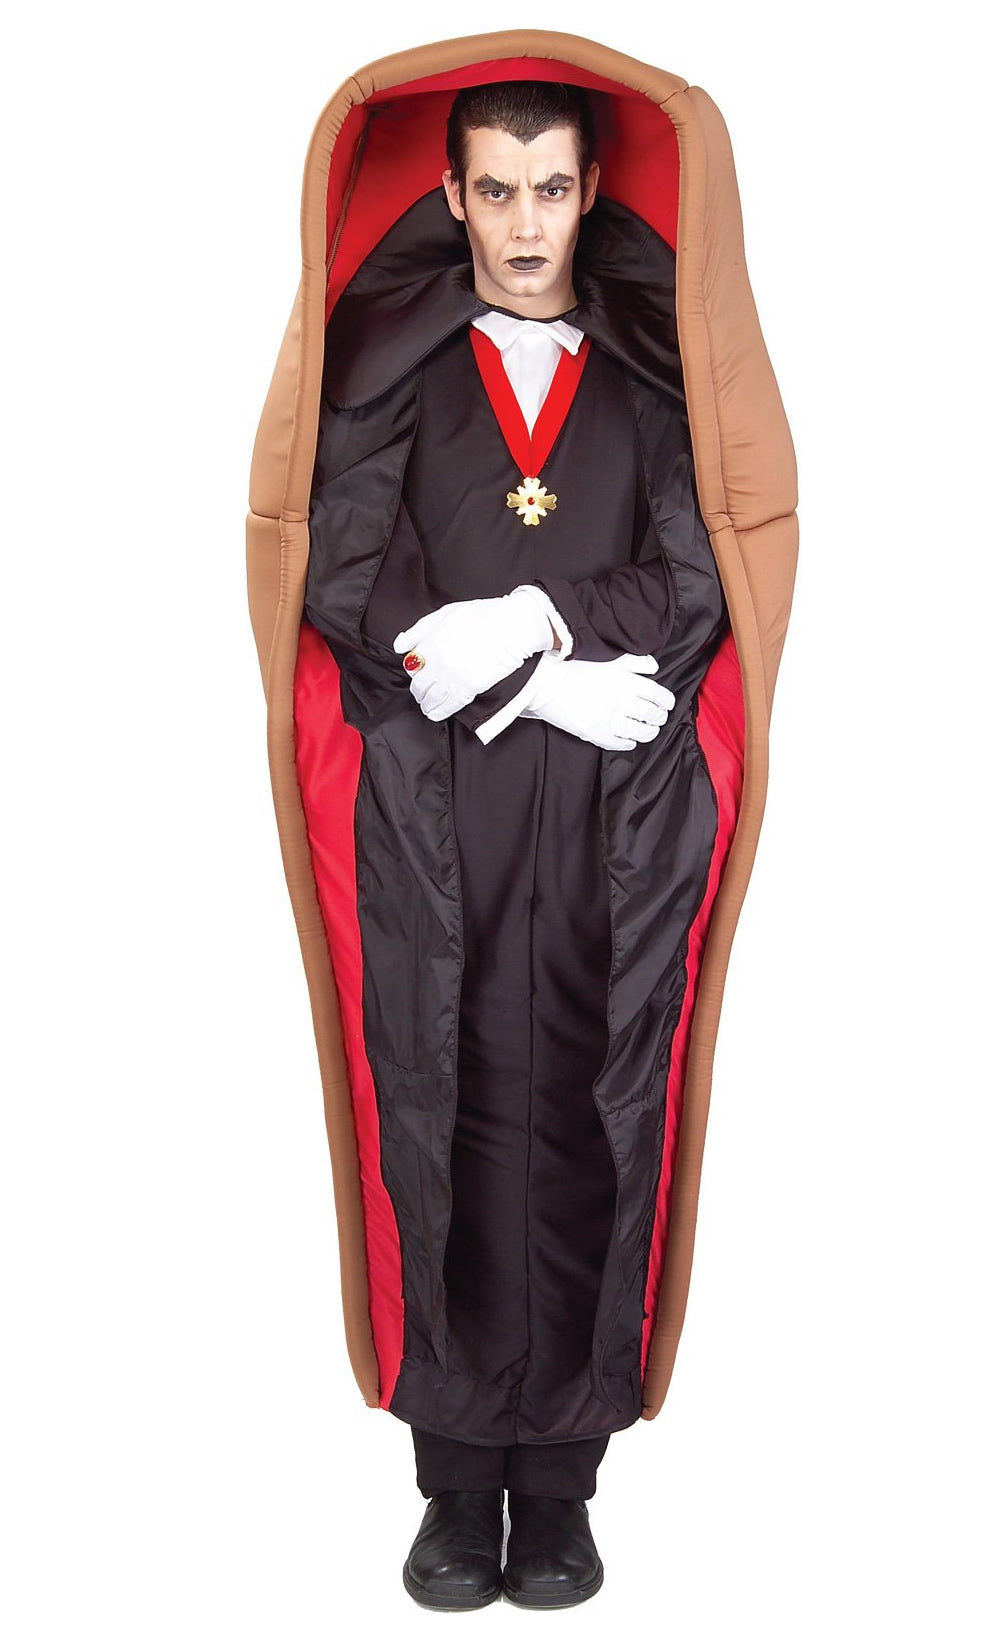 Dracula coffin costume with inbuilt suit and white gloves